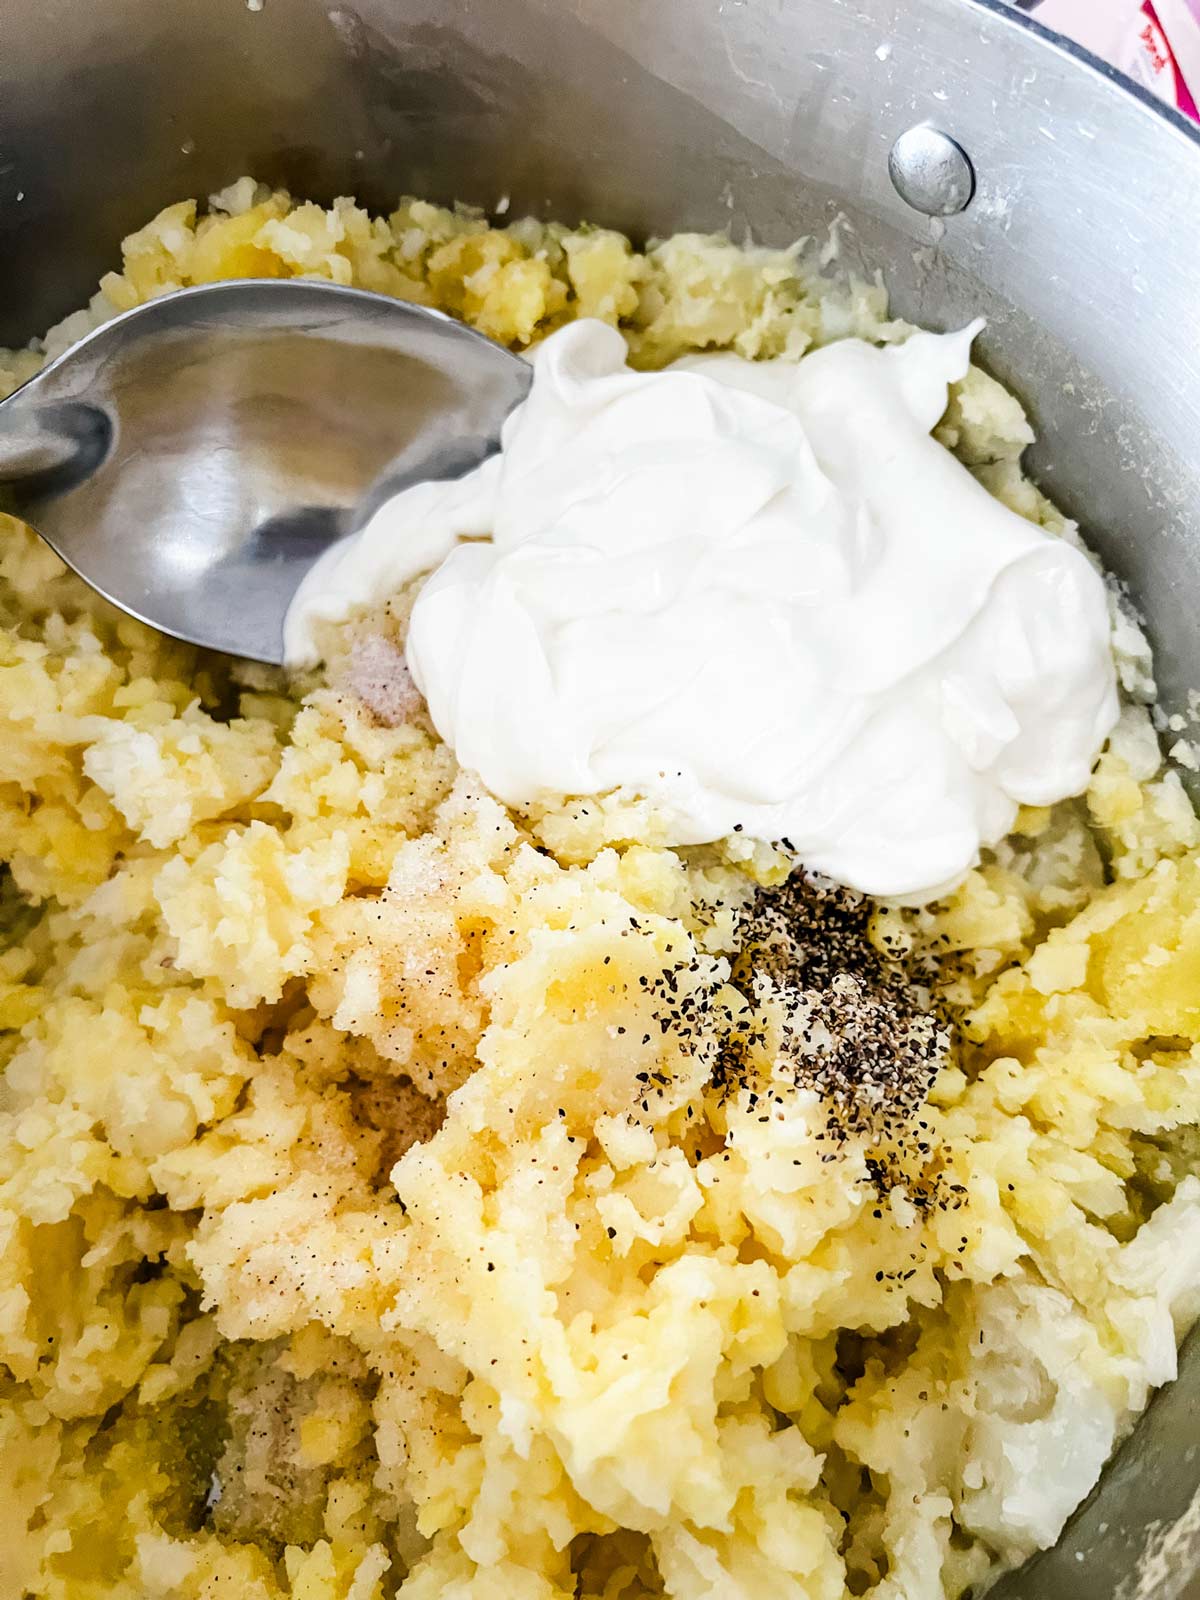 Mashed potatoes with sour cream being stirred in.